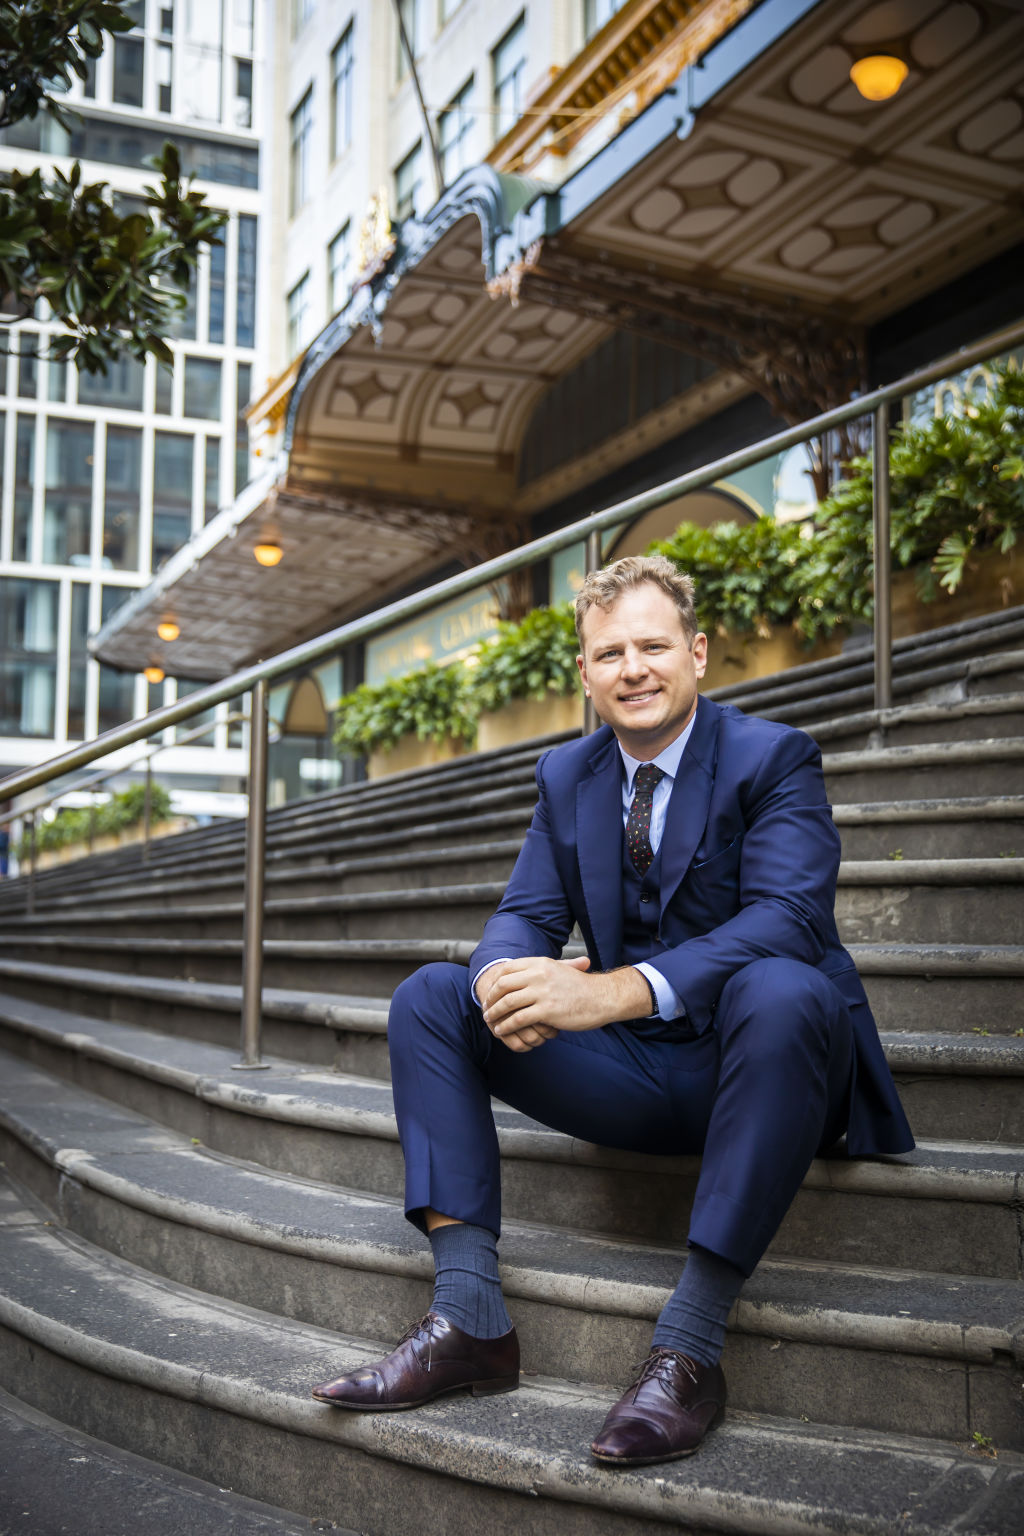 Foy is poised to open a new office in Potts Point, an area he says will become increasingly residential. Photo: Anna Kucera